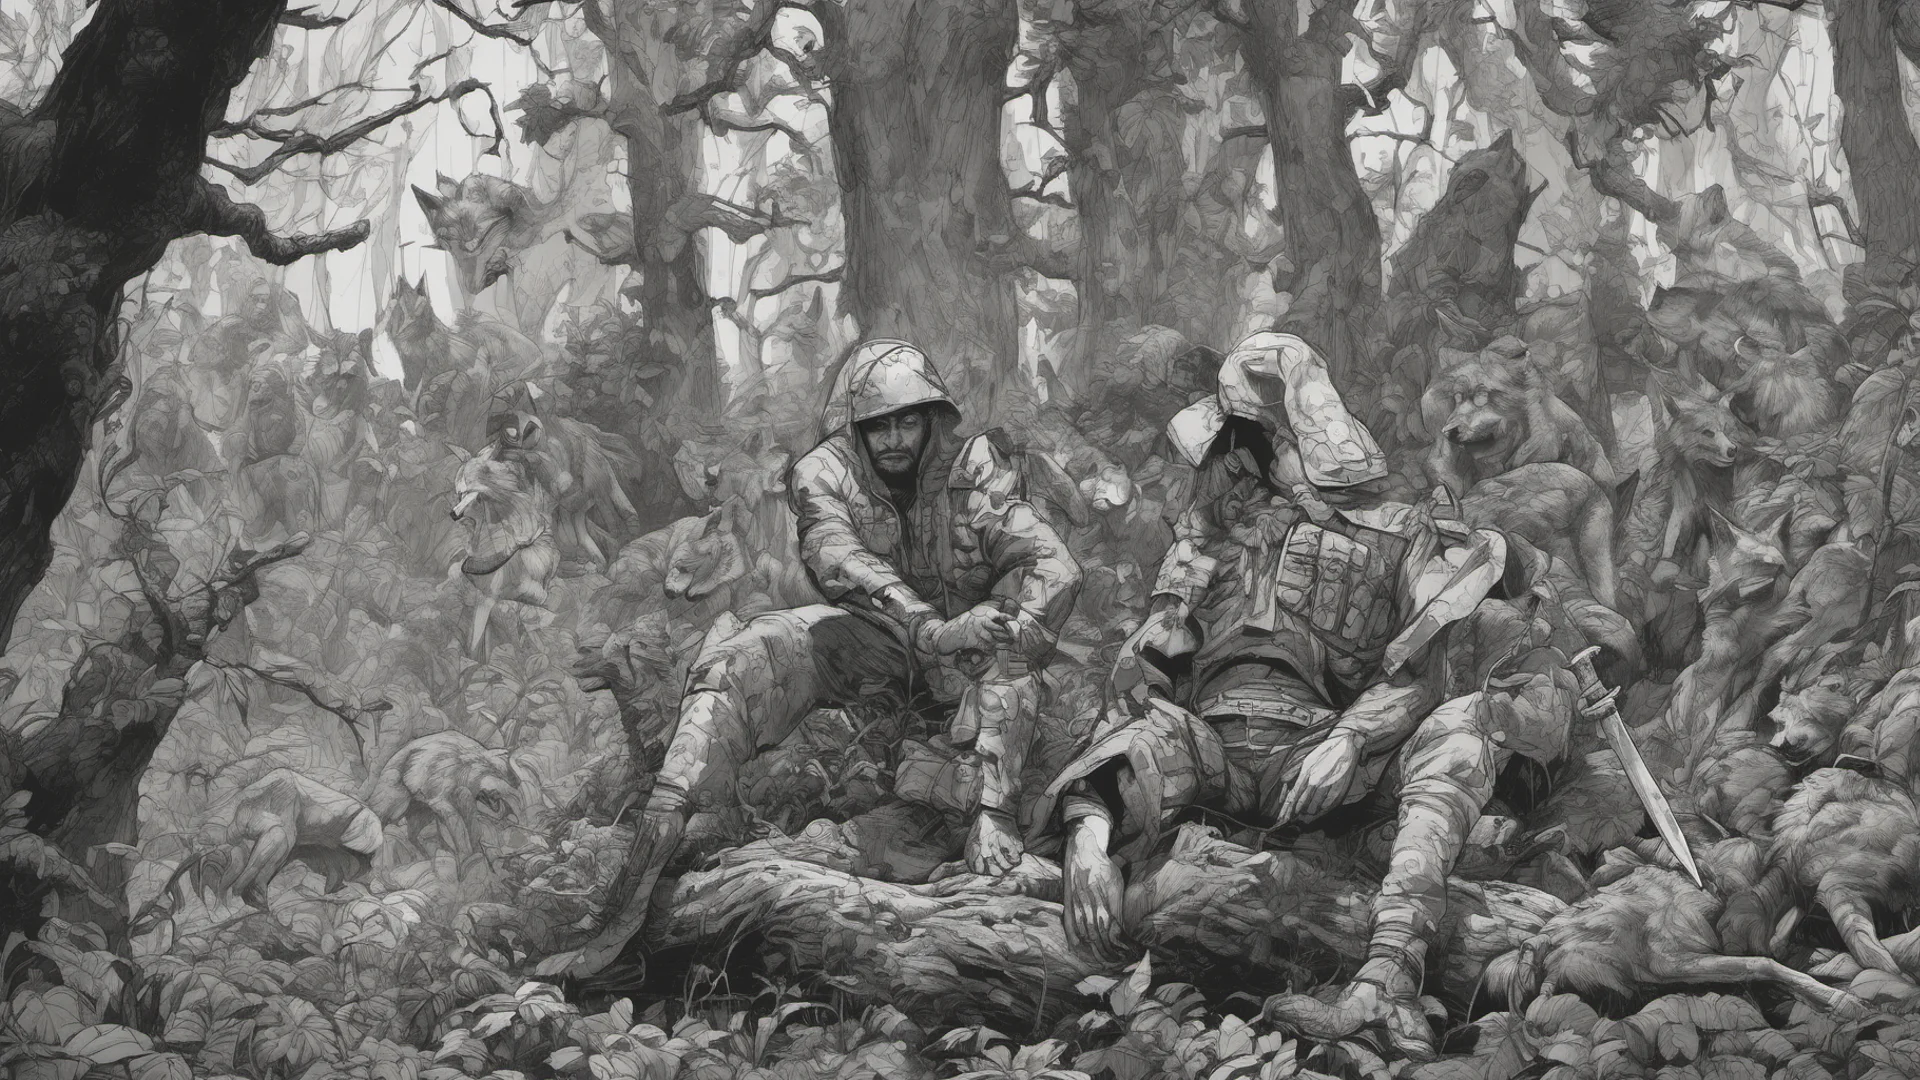 the most dungerous soldier%2C sitted in a fallen tree%2C holding a knife%2C in the middle of a dark and dungerous jungle%2C being watched by wolves and enemy soldiers amazing awesome portrait 2 wide